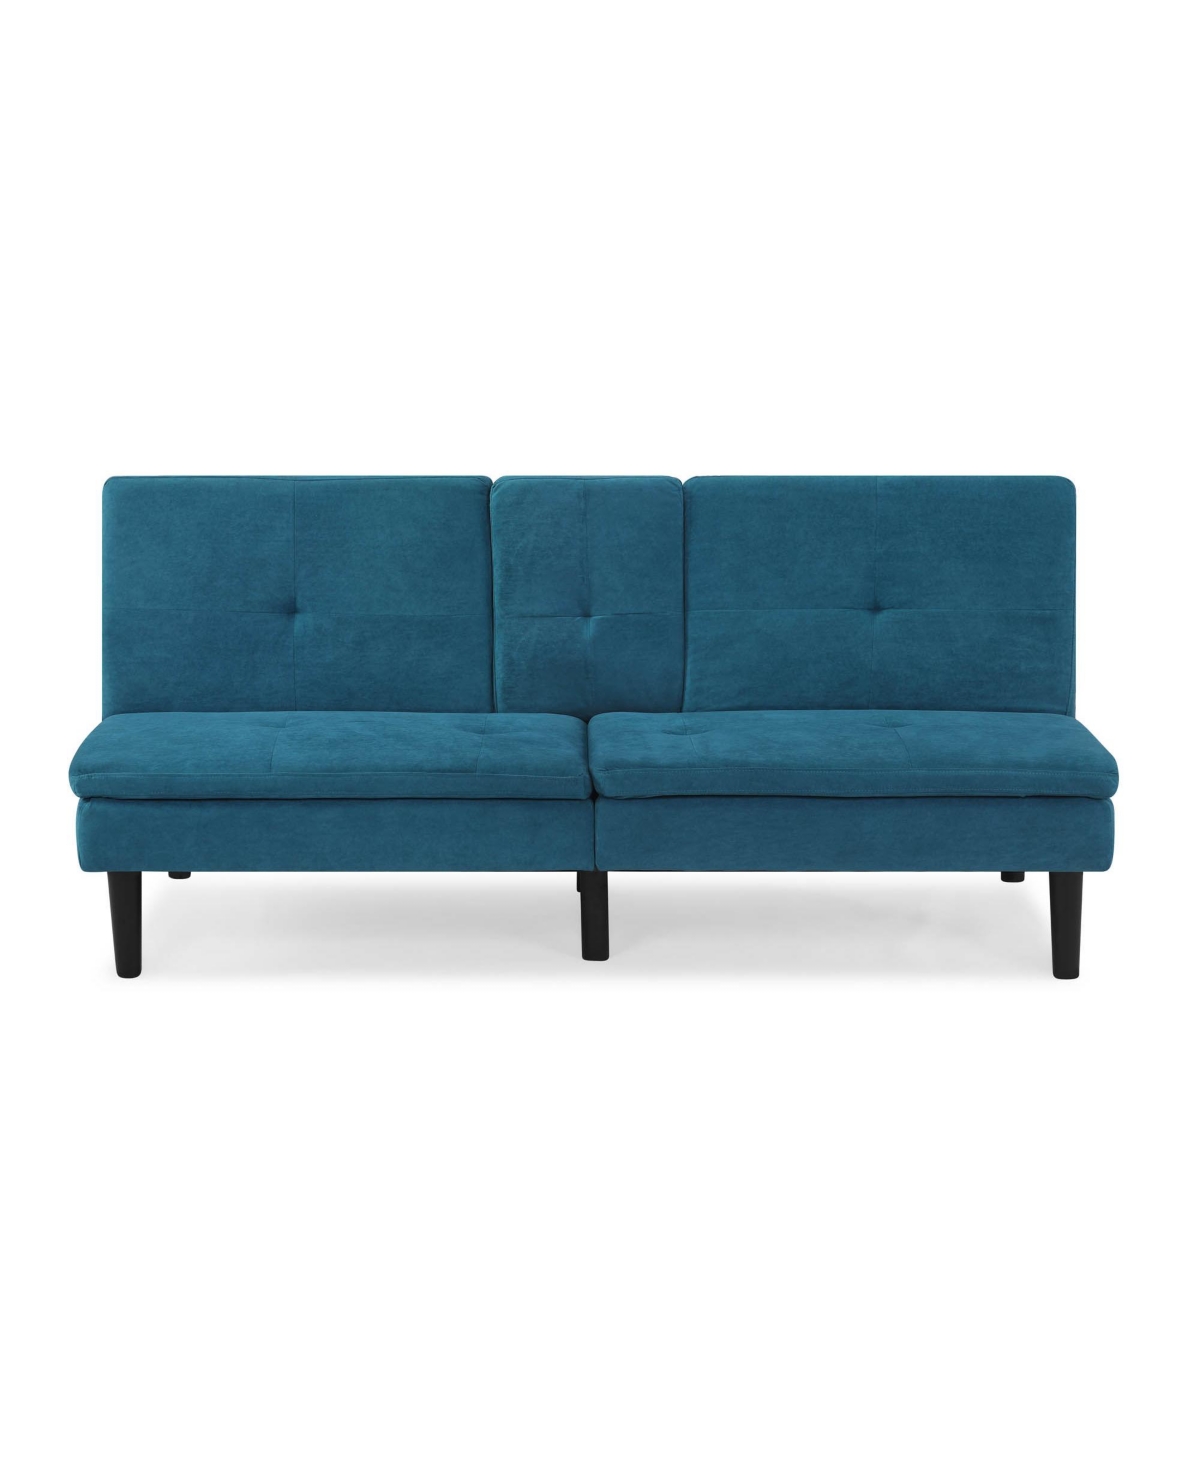 Lifestyle Solutions Serta Misa Convertible Futon With Power And Usb Ports In Teal